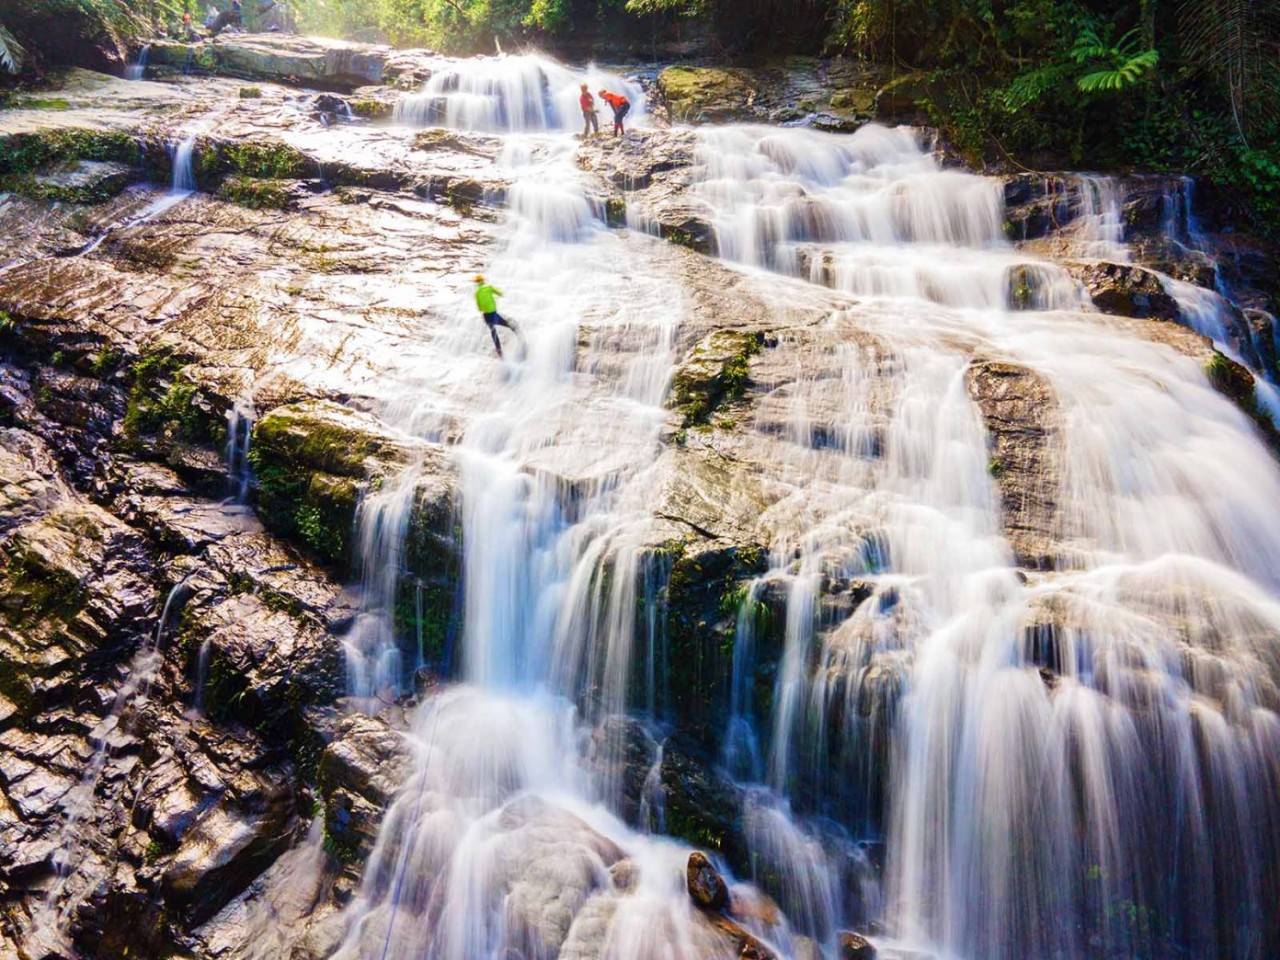 Duong Cam waterfall has a majestic and magical beauty among the mountains and forests of Quang Binh. Photo: Netin